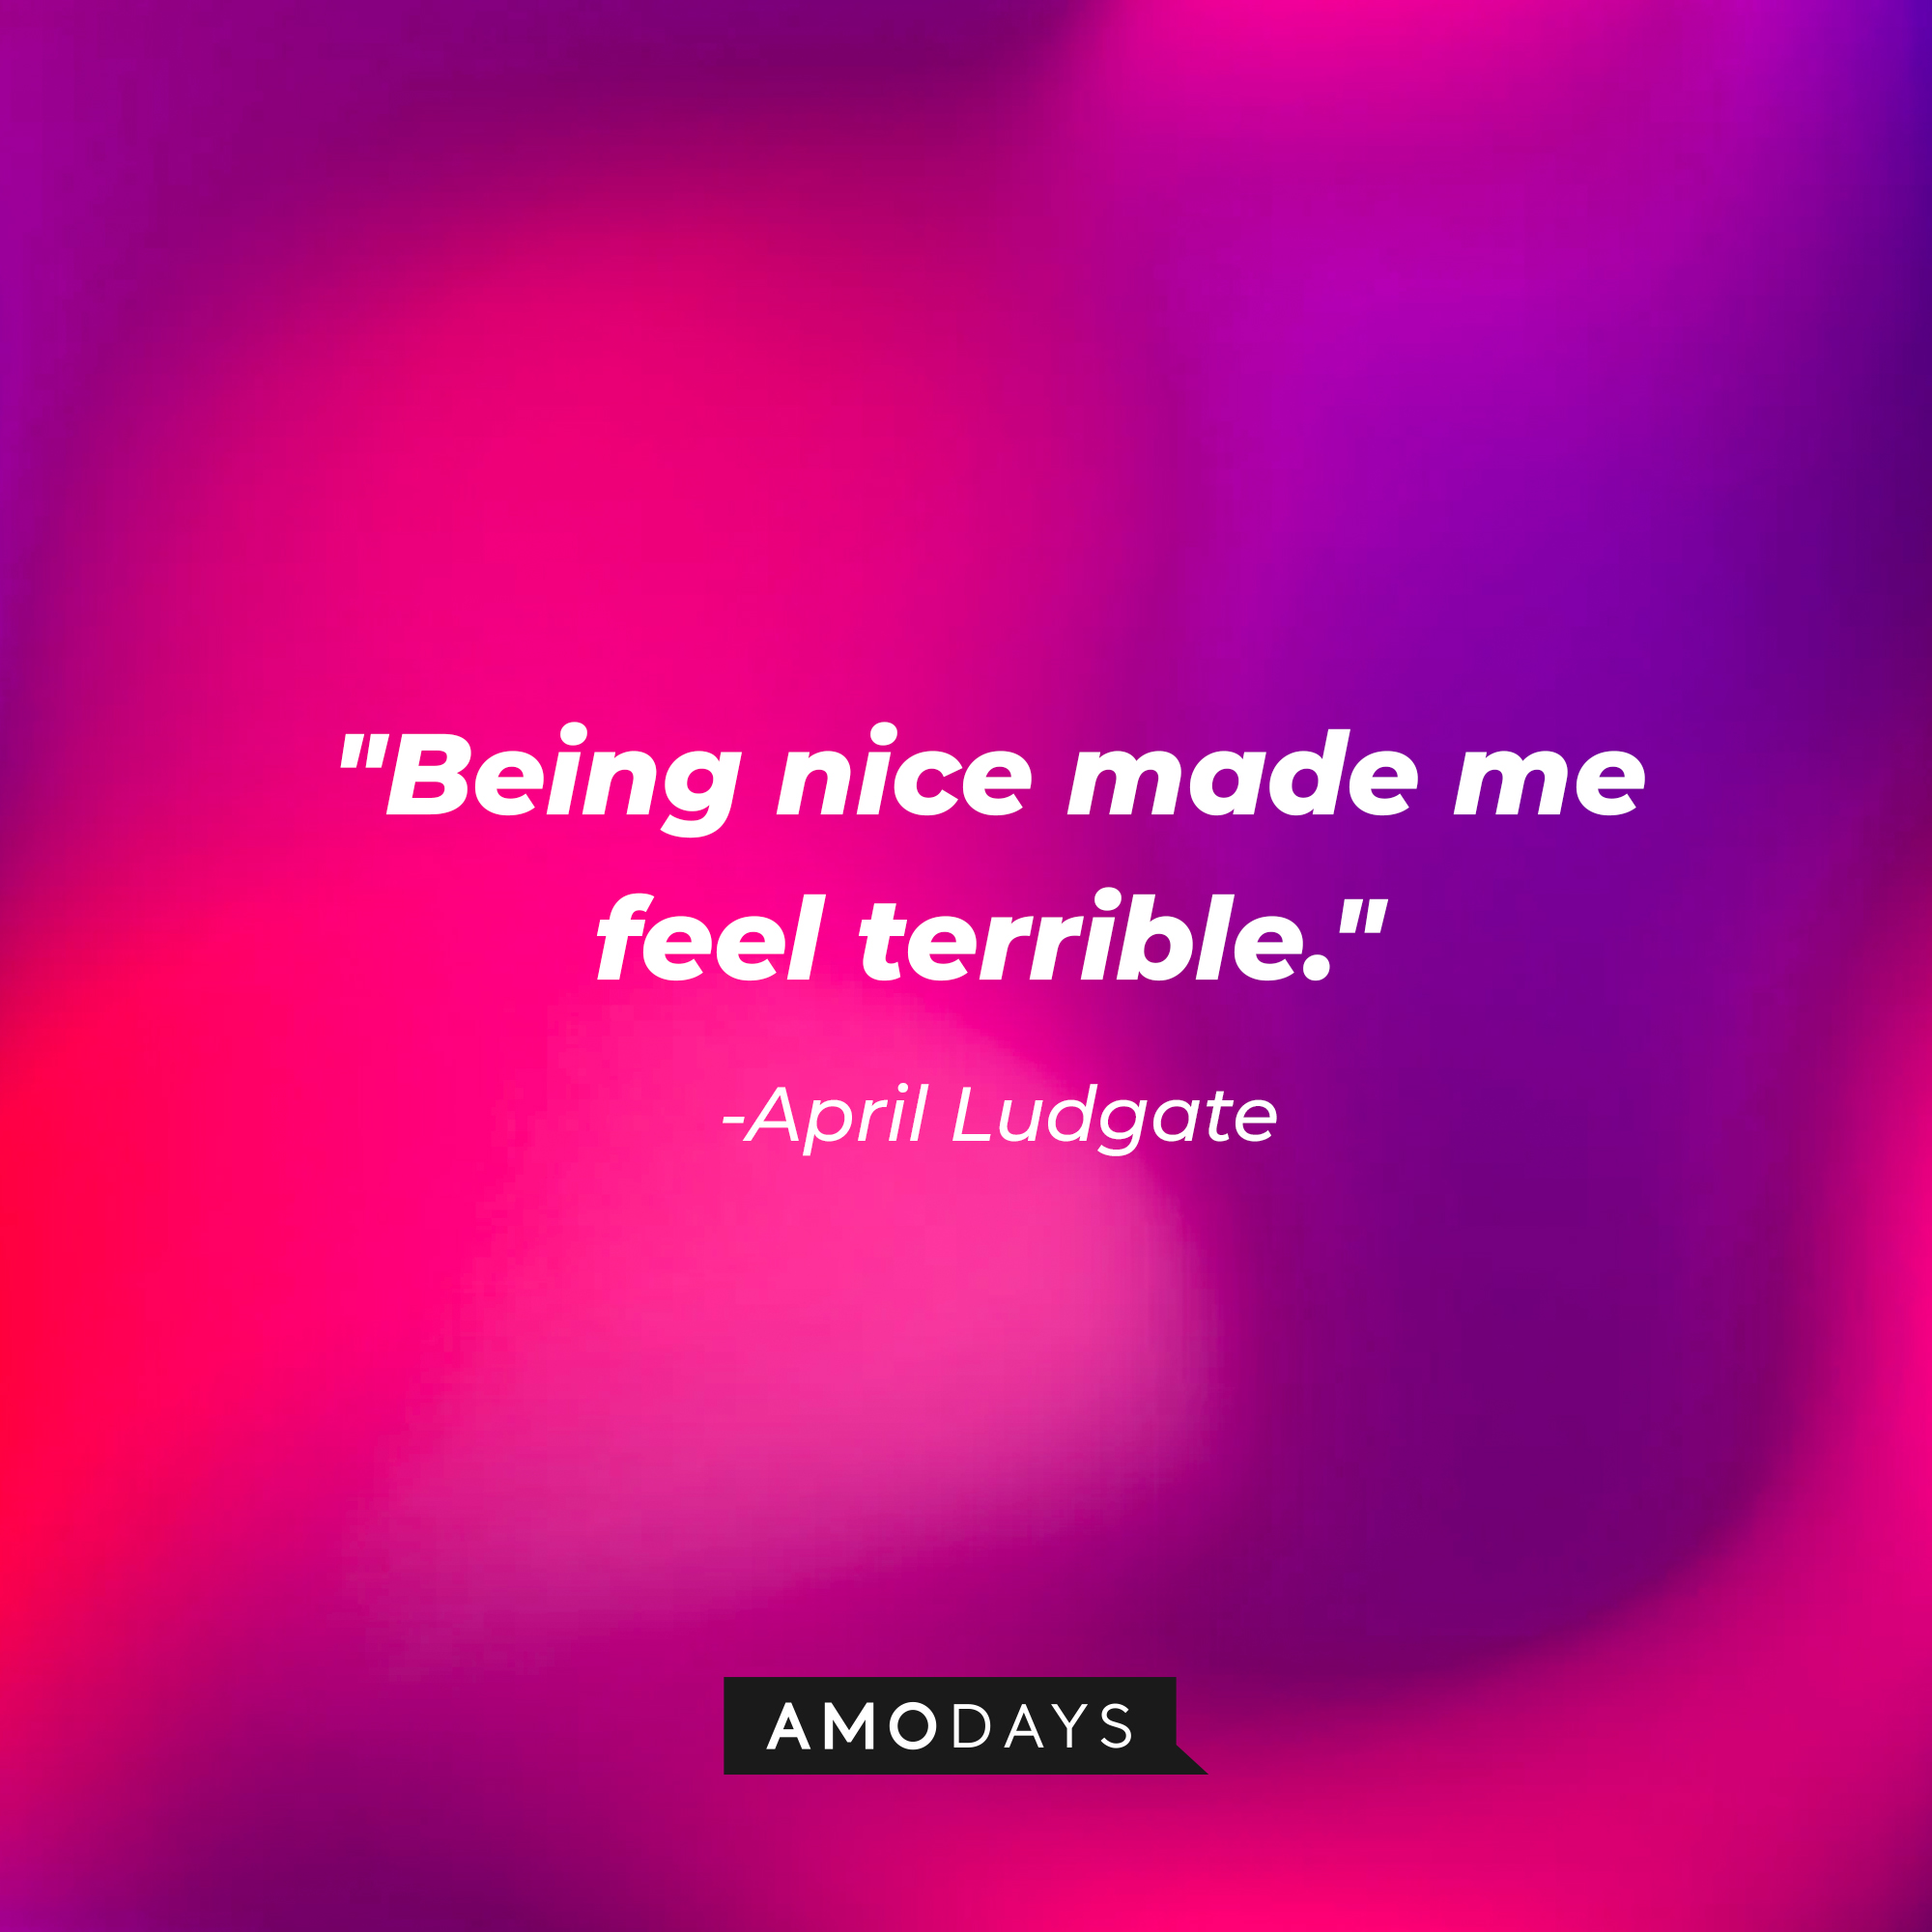 April Ludgate's quote, "Being nice made me feel terrible." | Source: AmoDays